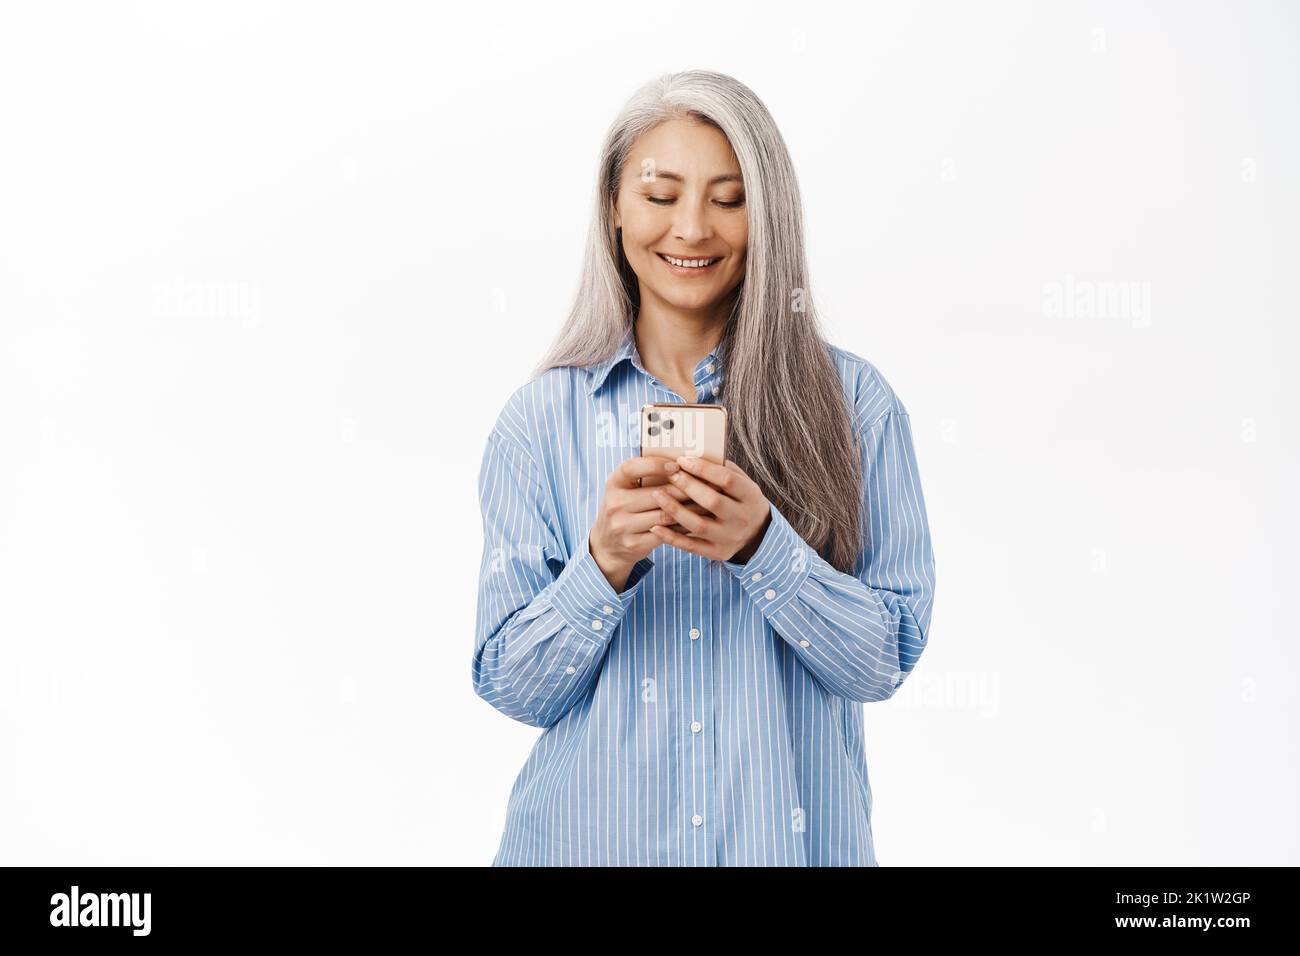 Portrait of smiling senior asian woman using smartphone. Japanese old lady holding mobile phone with happy face, standing over white background. Stock Photo